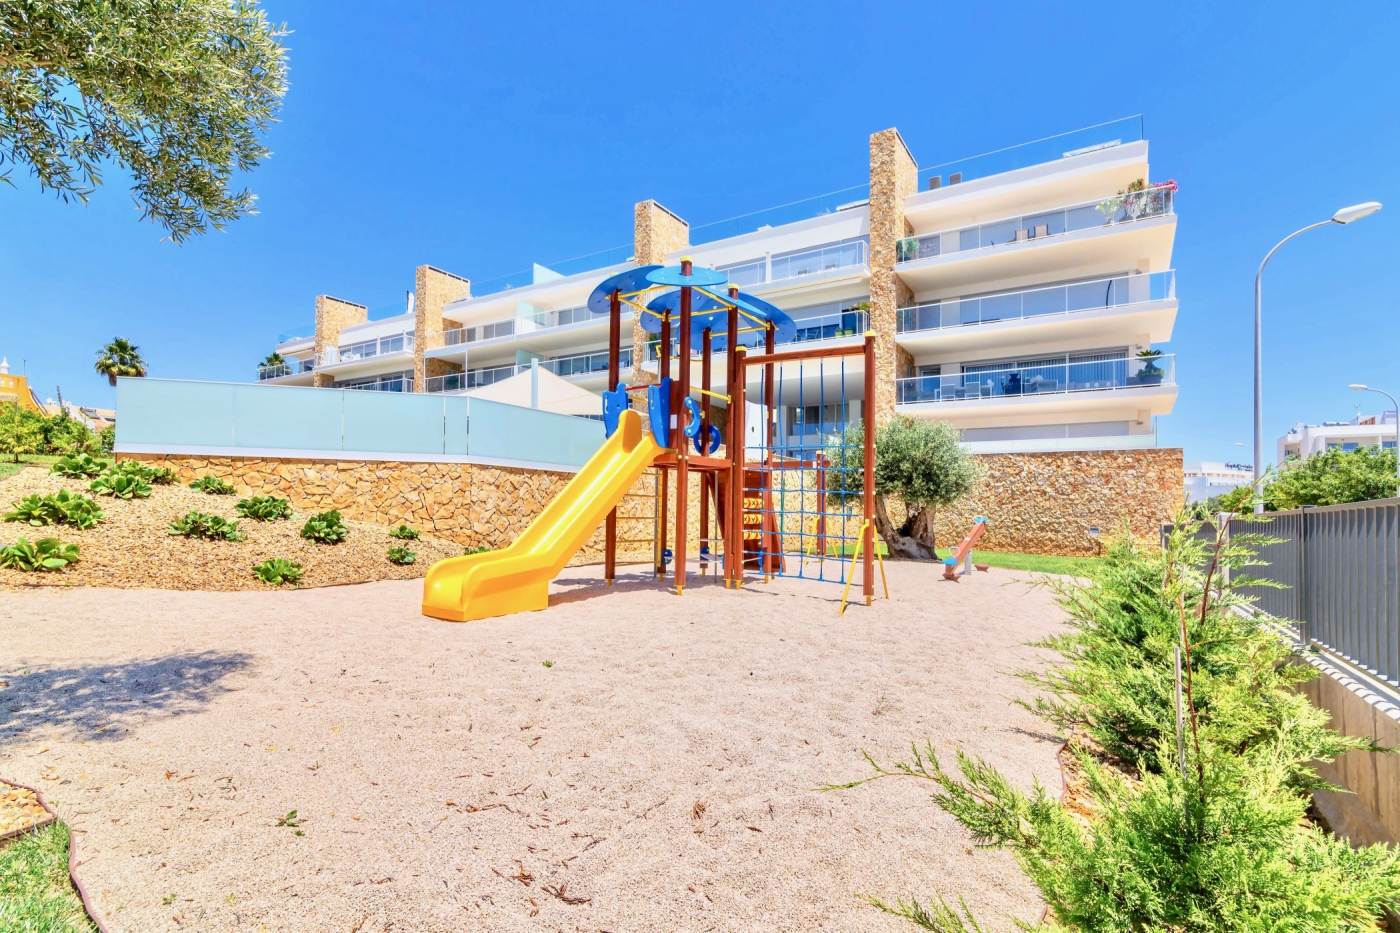 Garden Design brand new apartment with pool in Albufeira